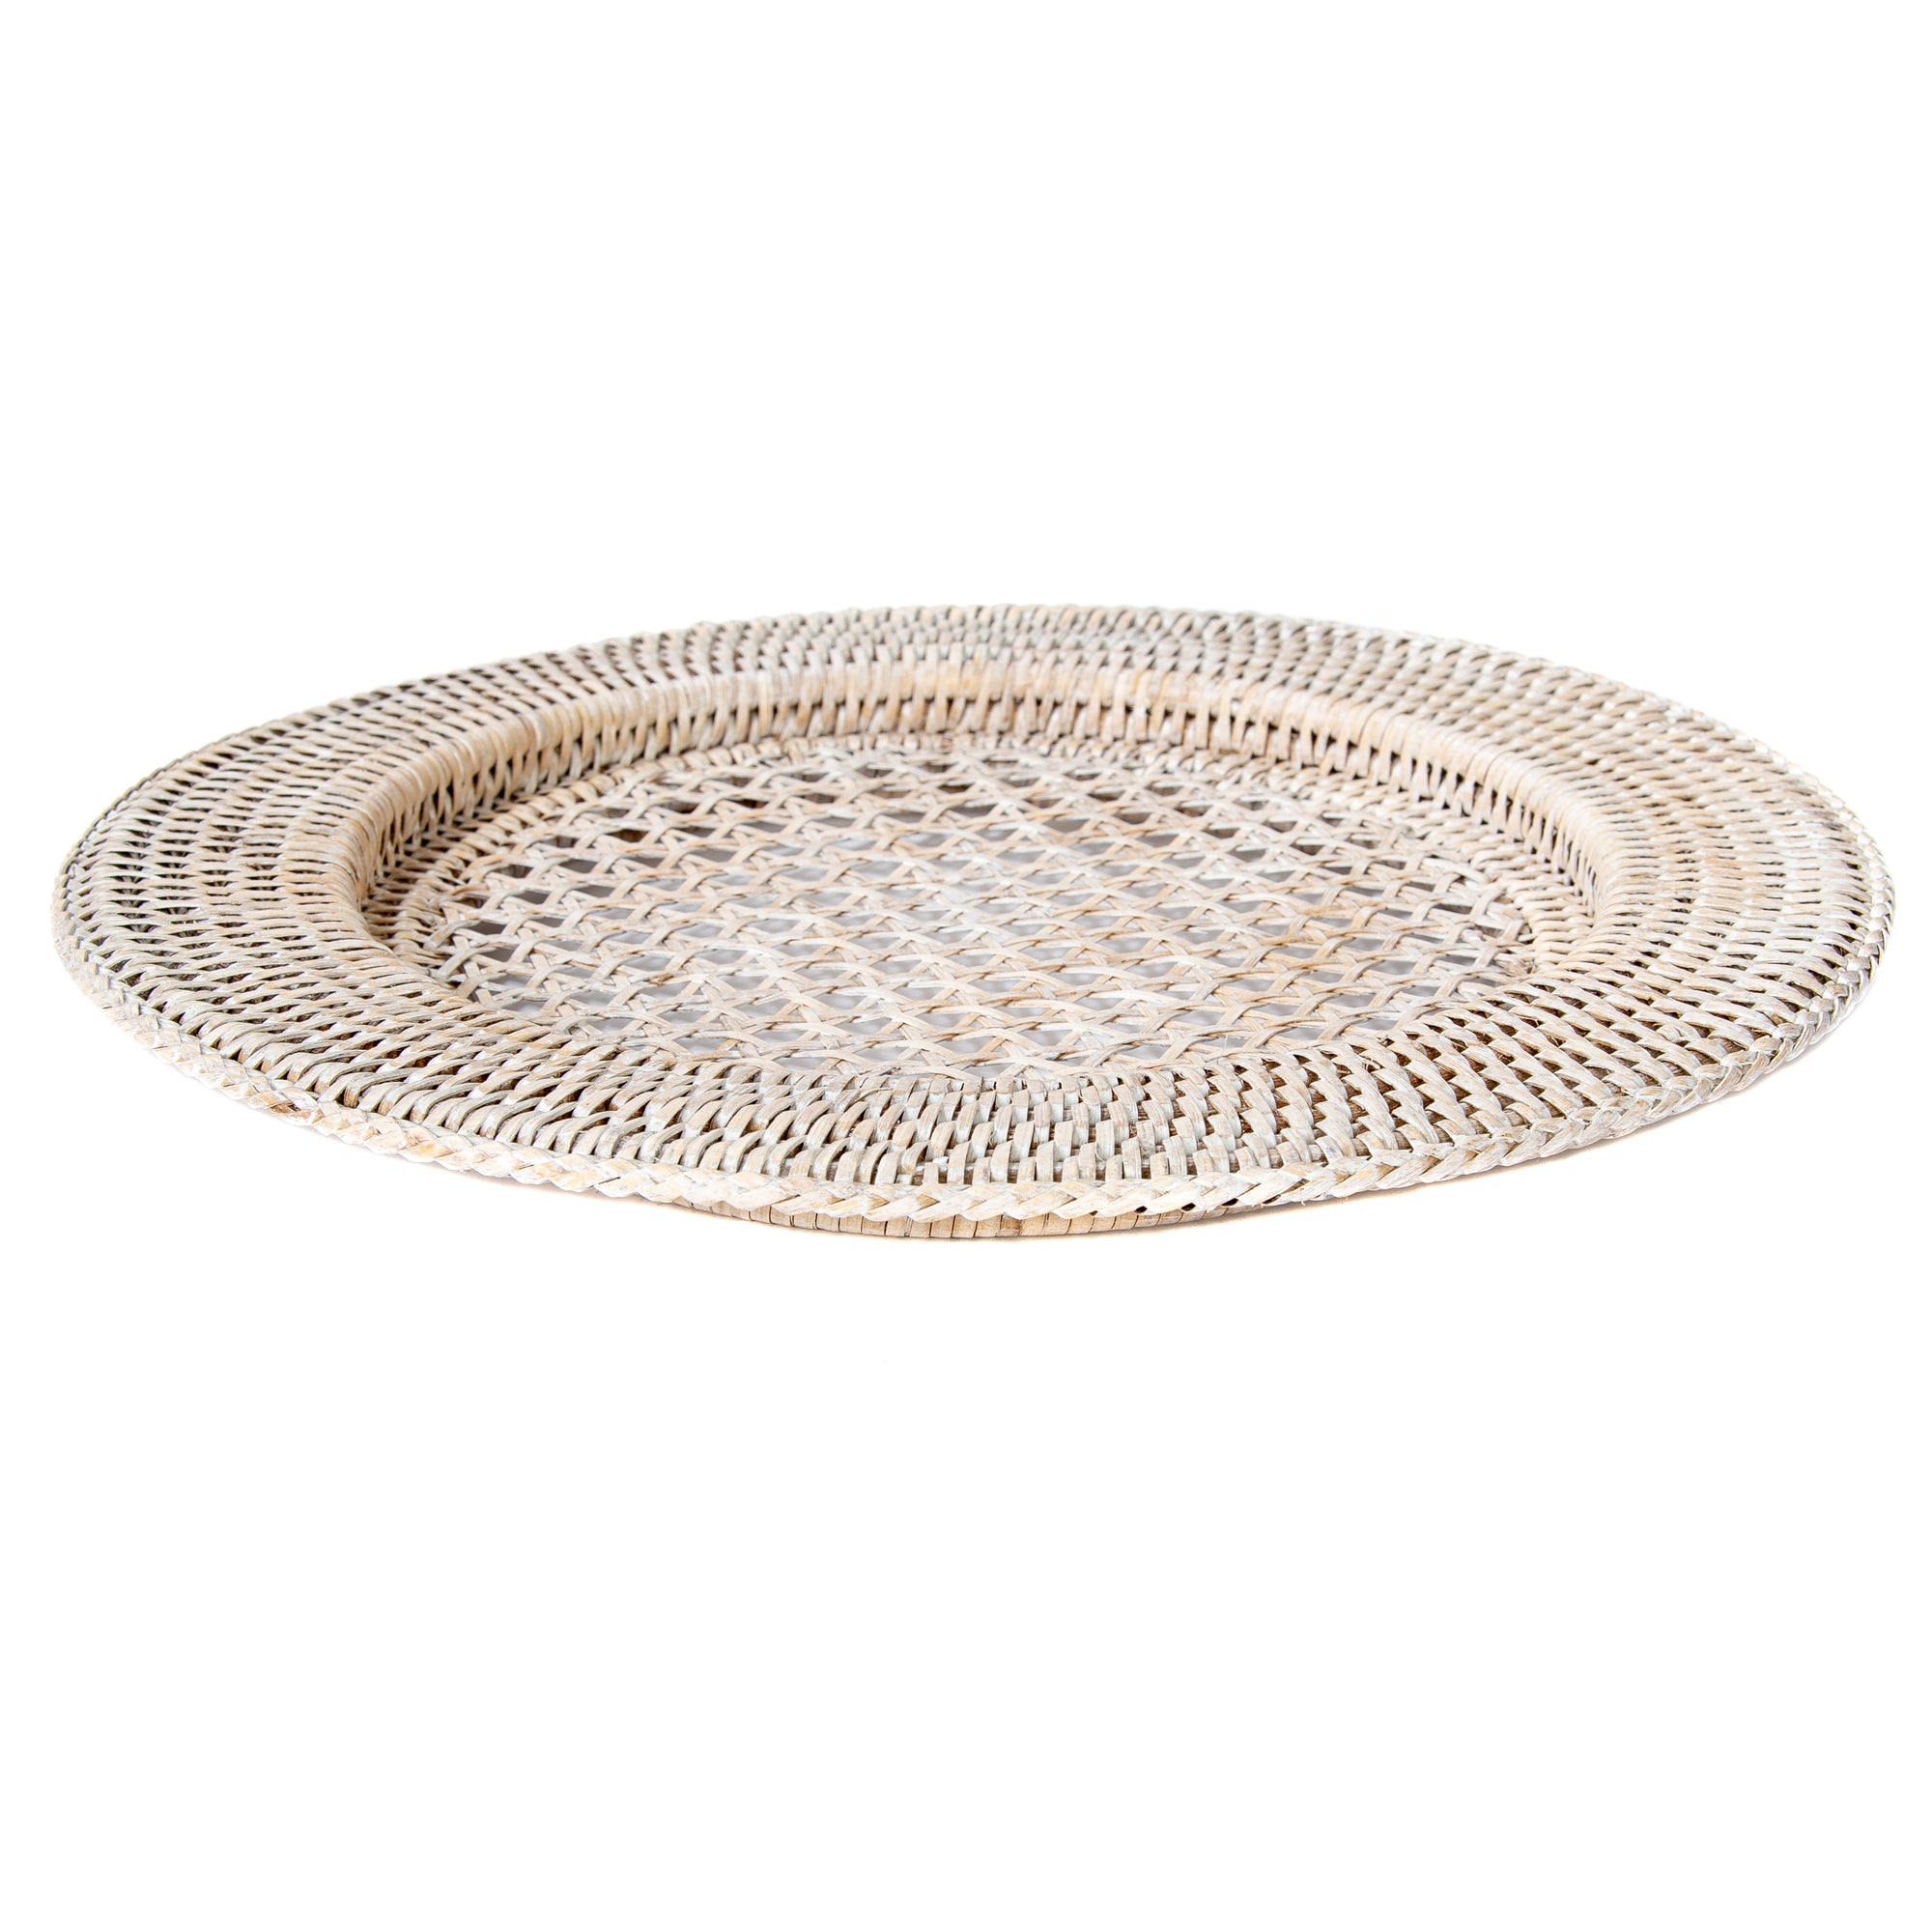 Open Weave Chargers White Wash